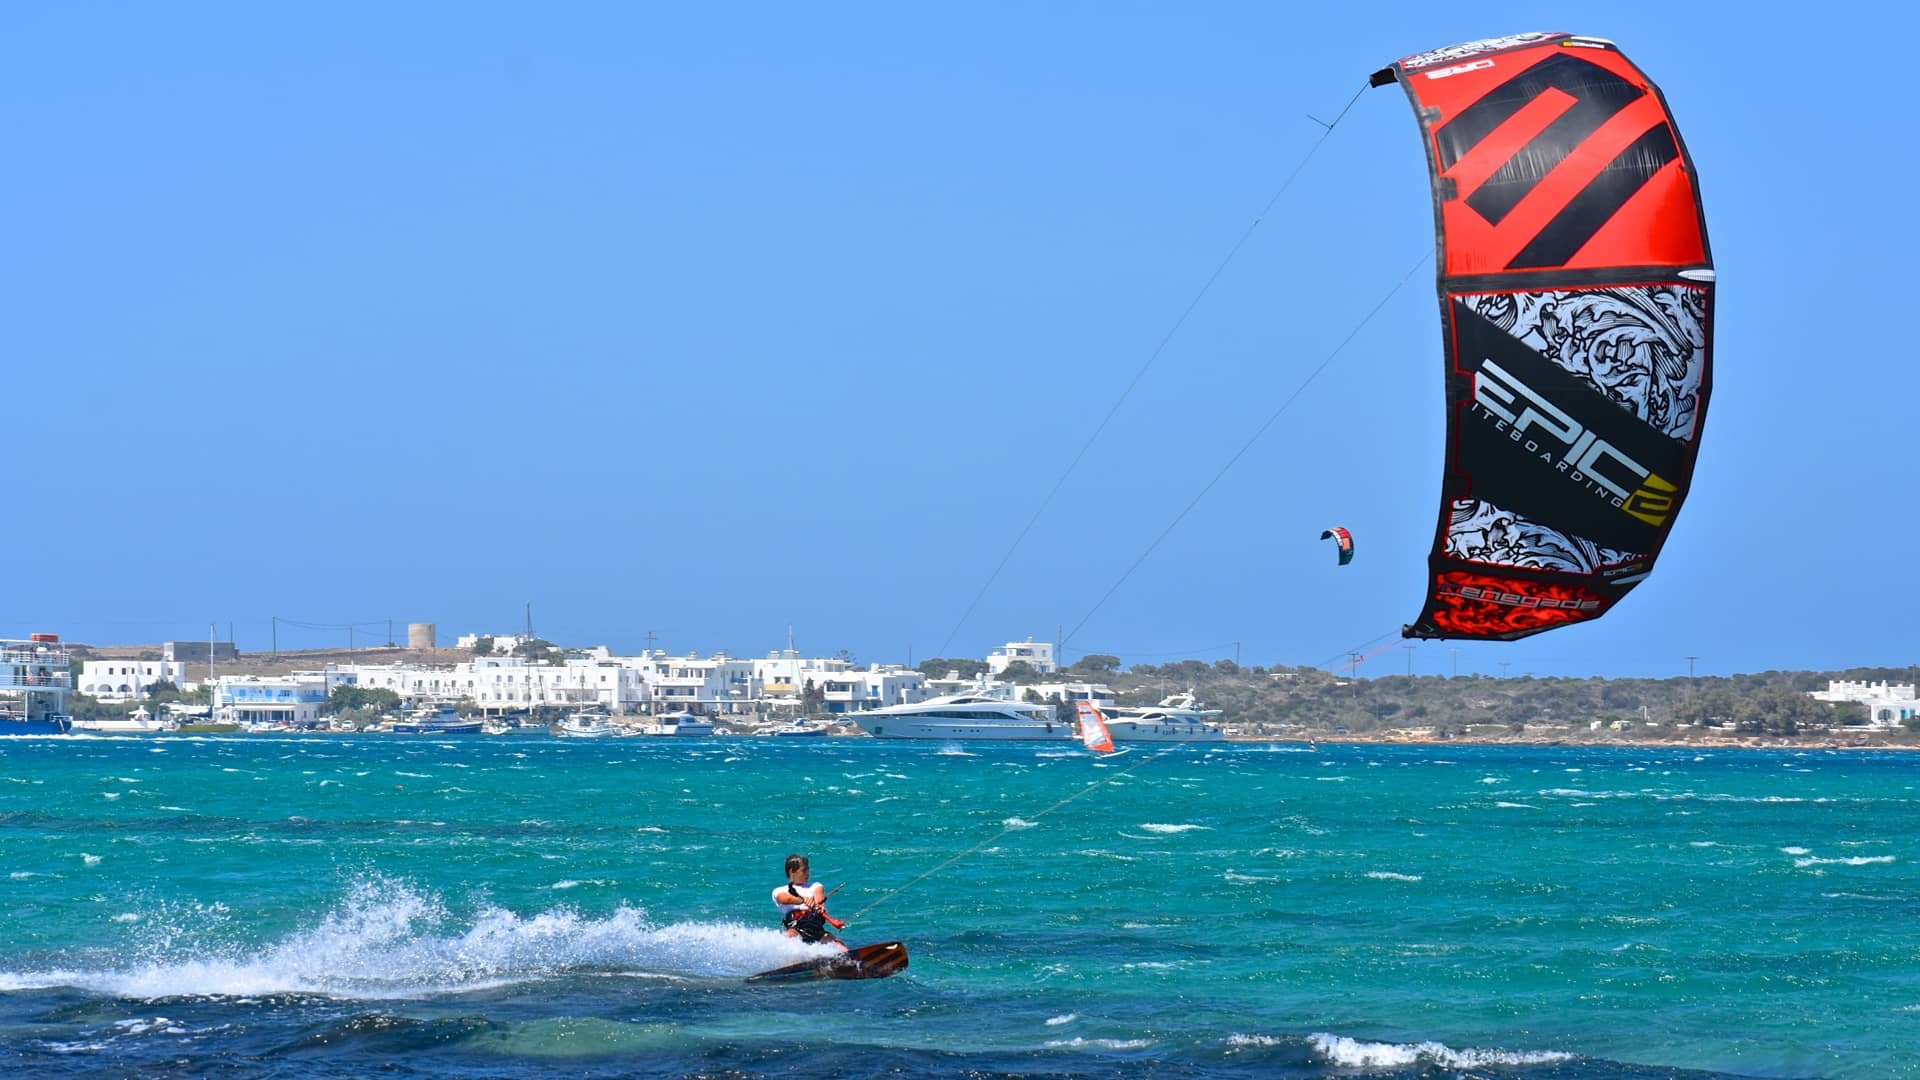 Kiteboarding: Tricks and aerials, A wake-style board with bindings, Foiling with a kite. 1920x1080 Full HD Wallpaper.